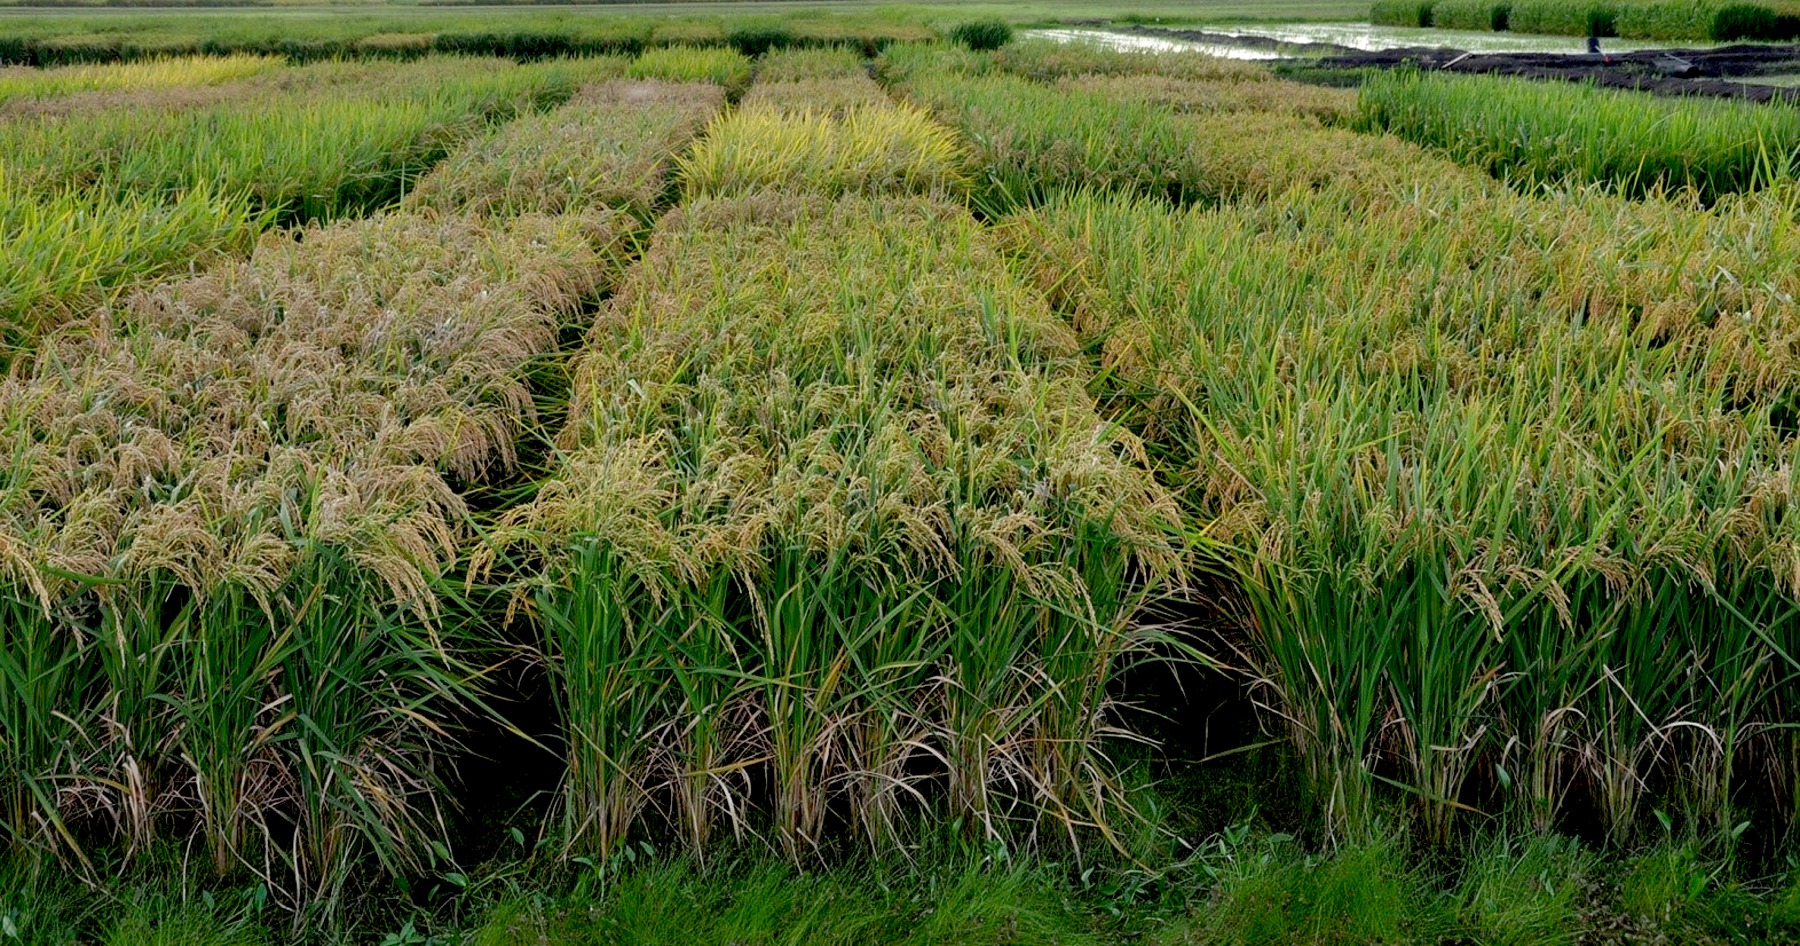 Different varieties of rice growing in a field